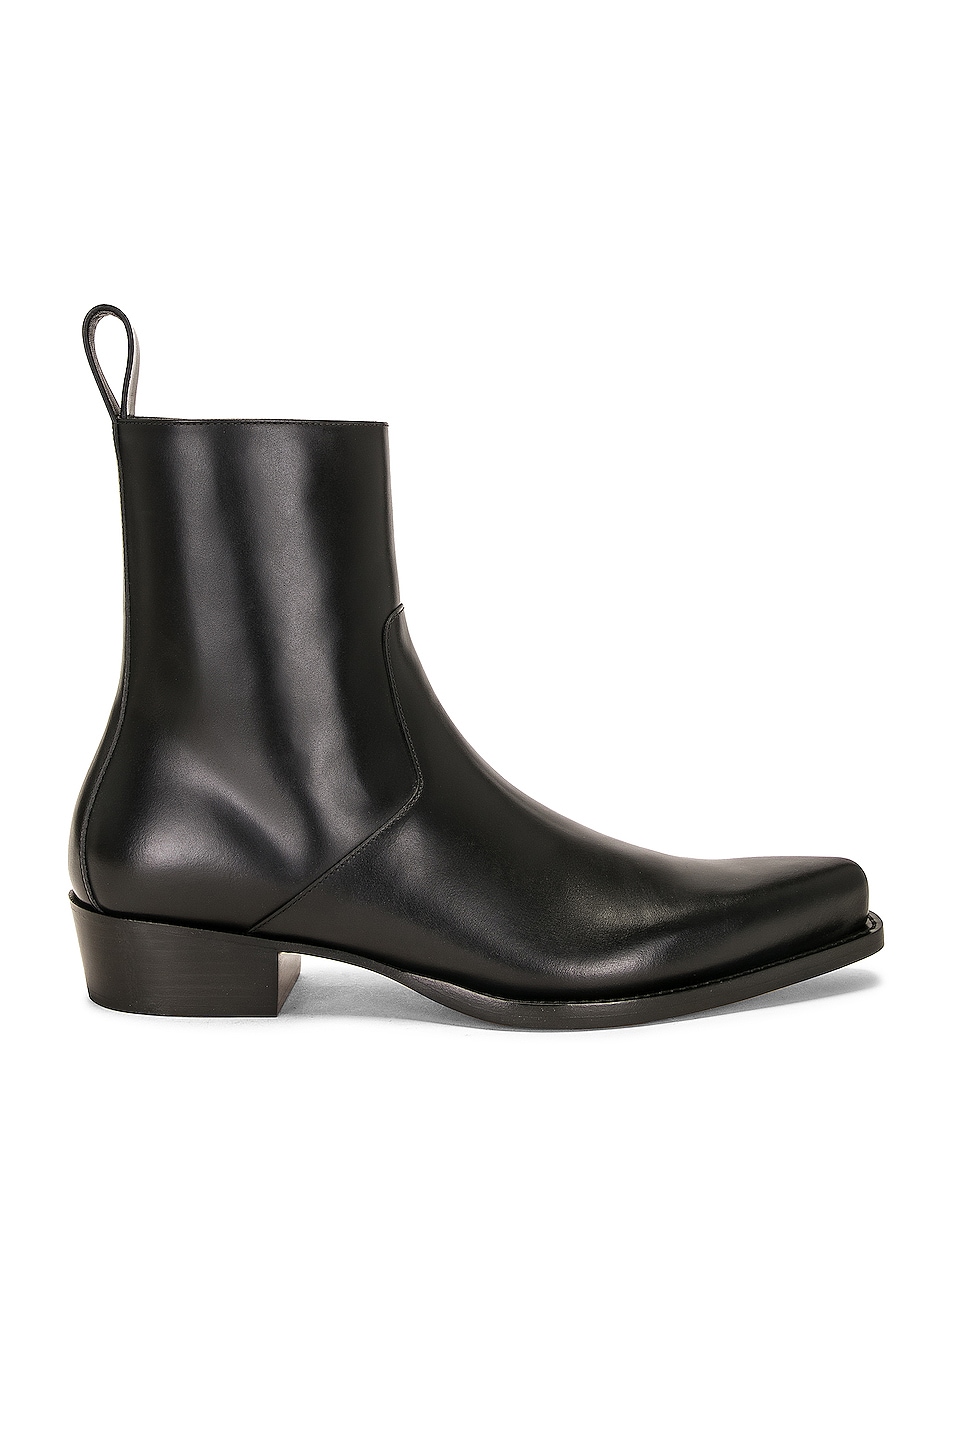 Ripley Ankle Boot in Black